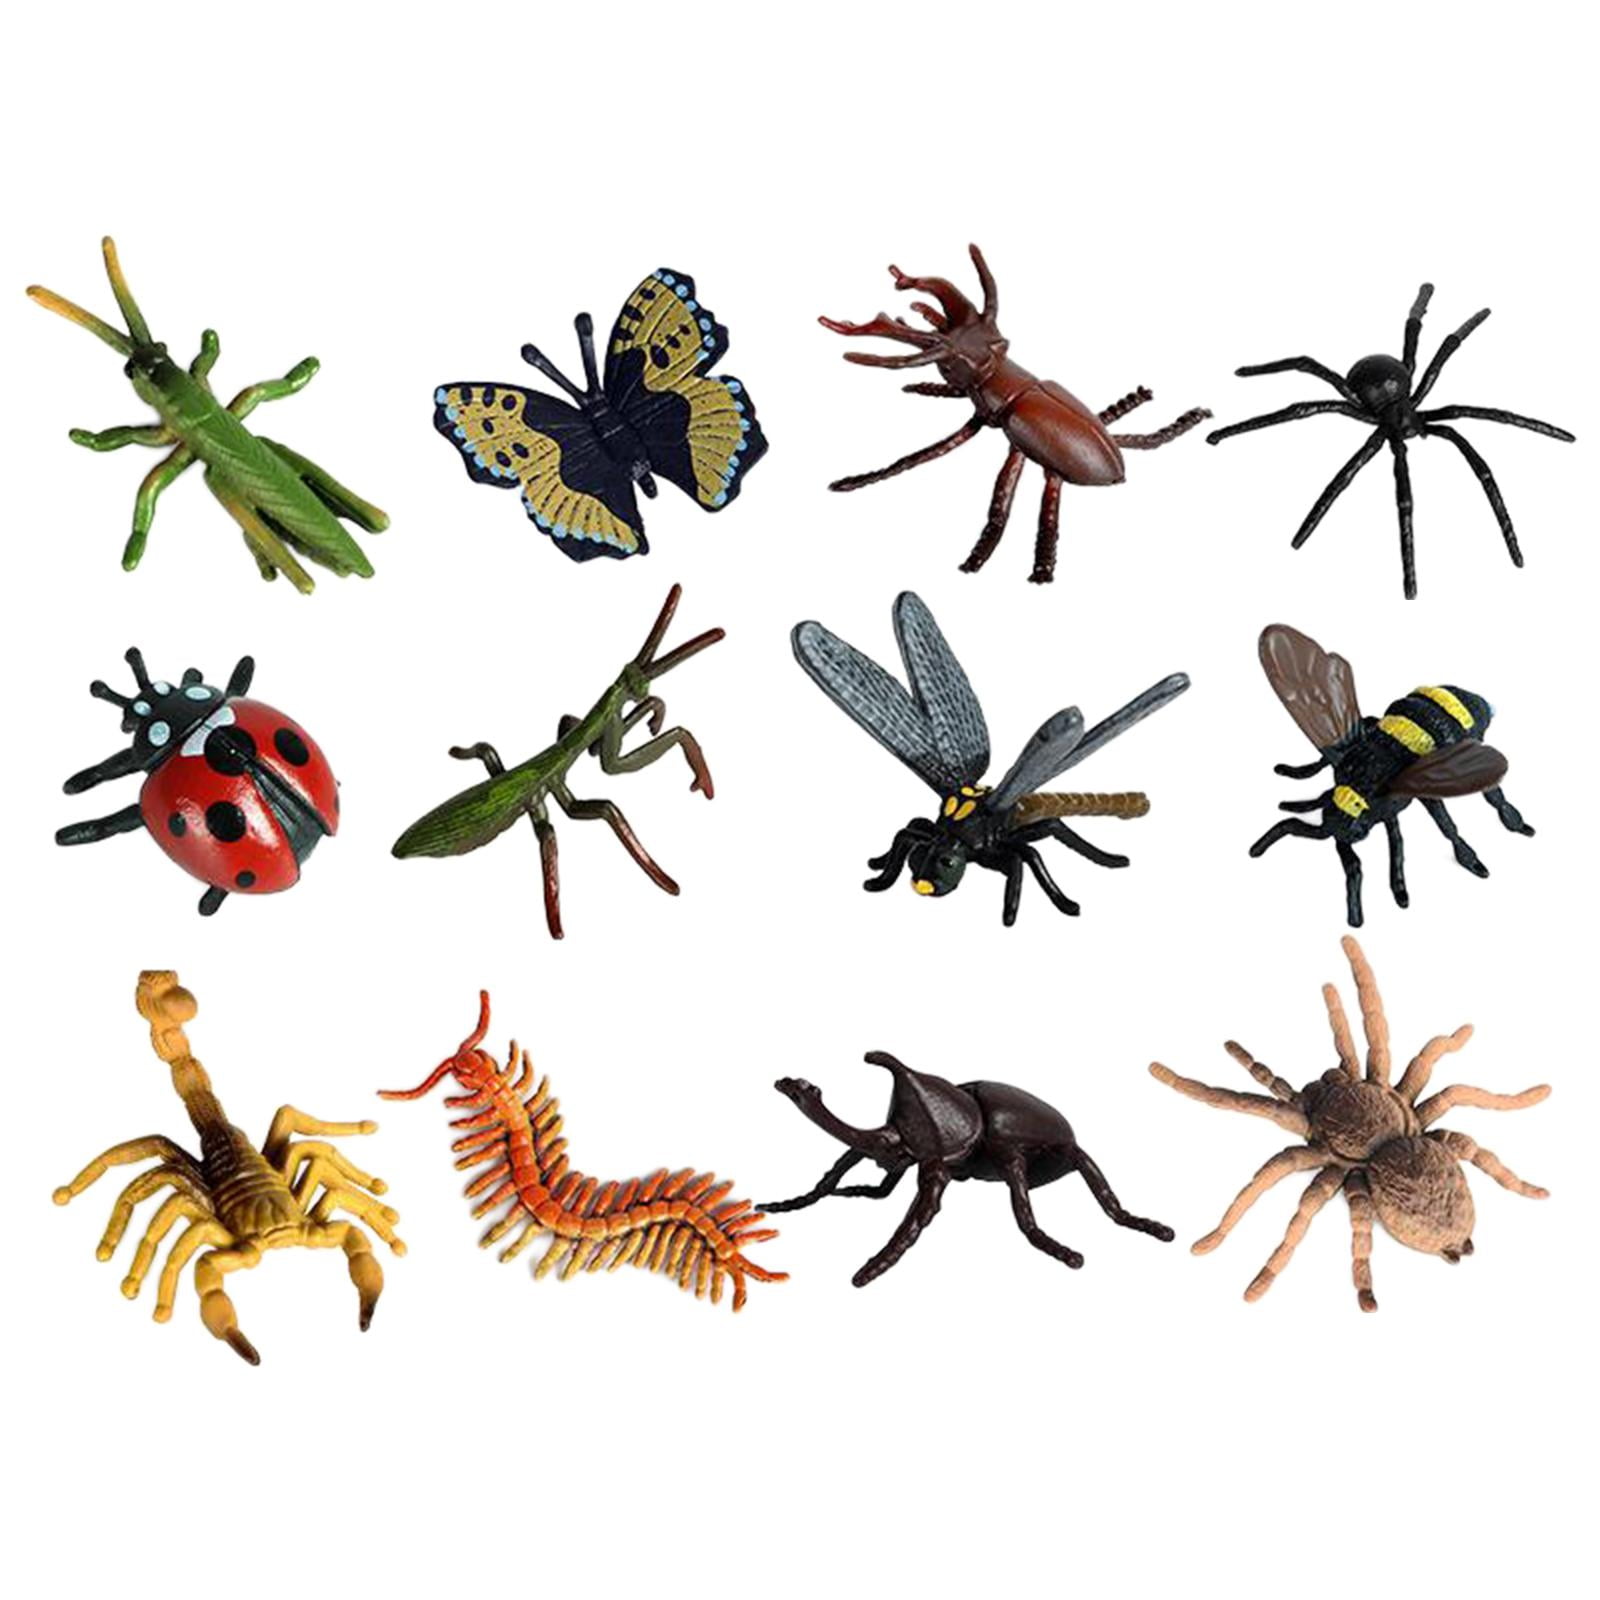 10 Assorted figure realistic bugs plastic insects kisd party bag filler toy an 